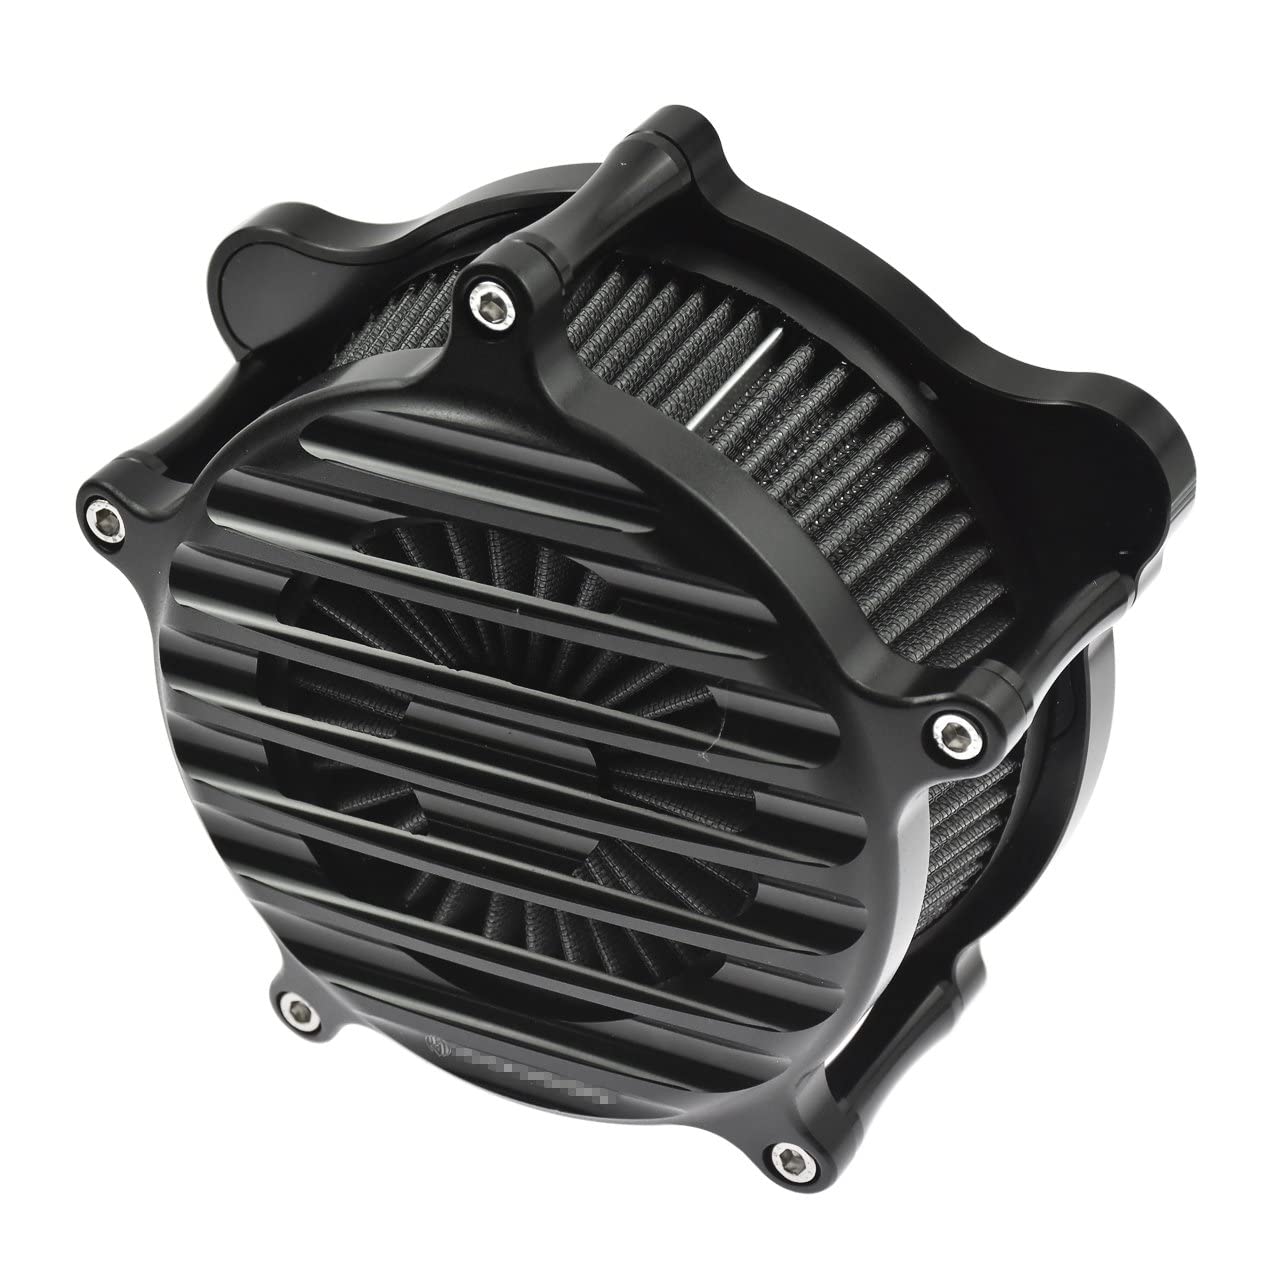 HDBUBALUS Motorcycle Black Air Filter CNC Air Cleaner Intake System Kit Fit for Harley 2017 up Touring 2018 Softail von HDBUBALUS